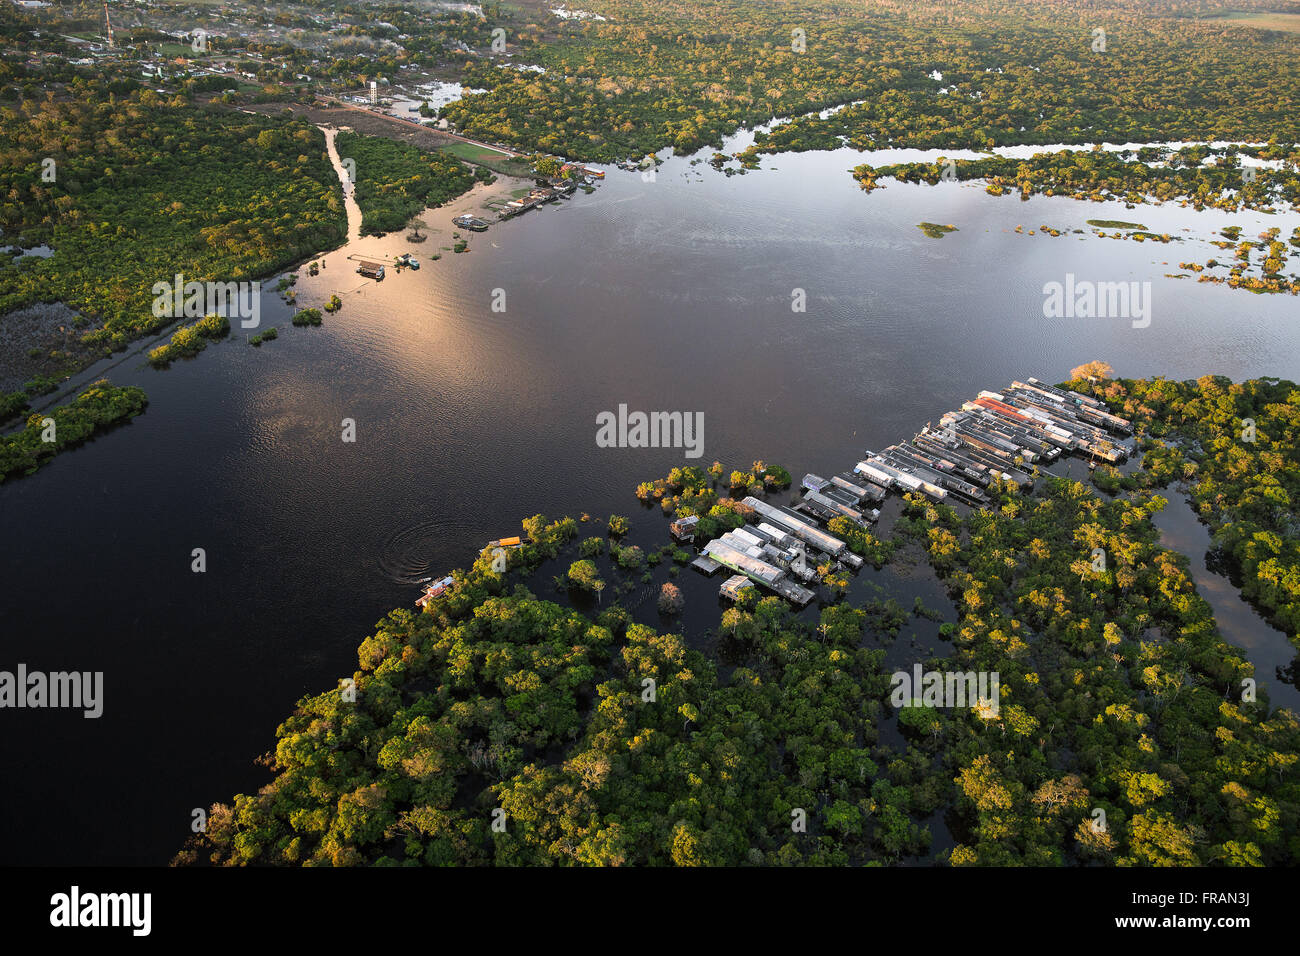 Small trading town on stilts - Guapore bank of the River - the border Bolivia / Brazil Stock Photo